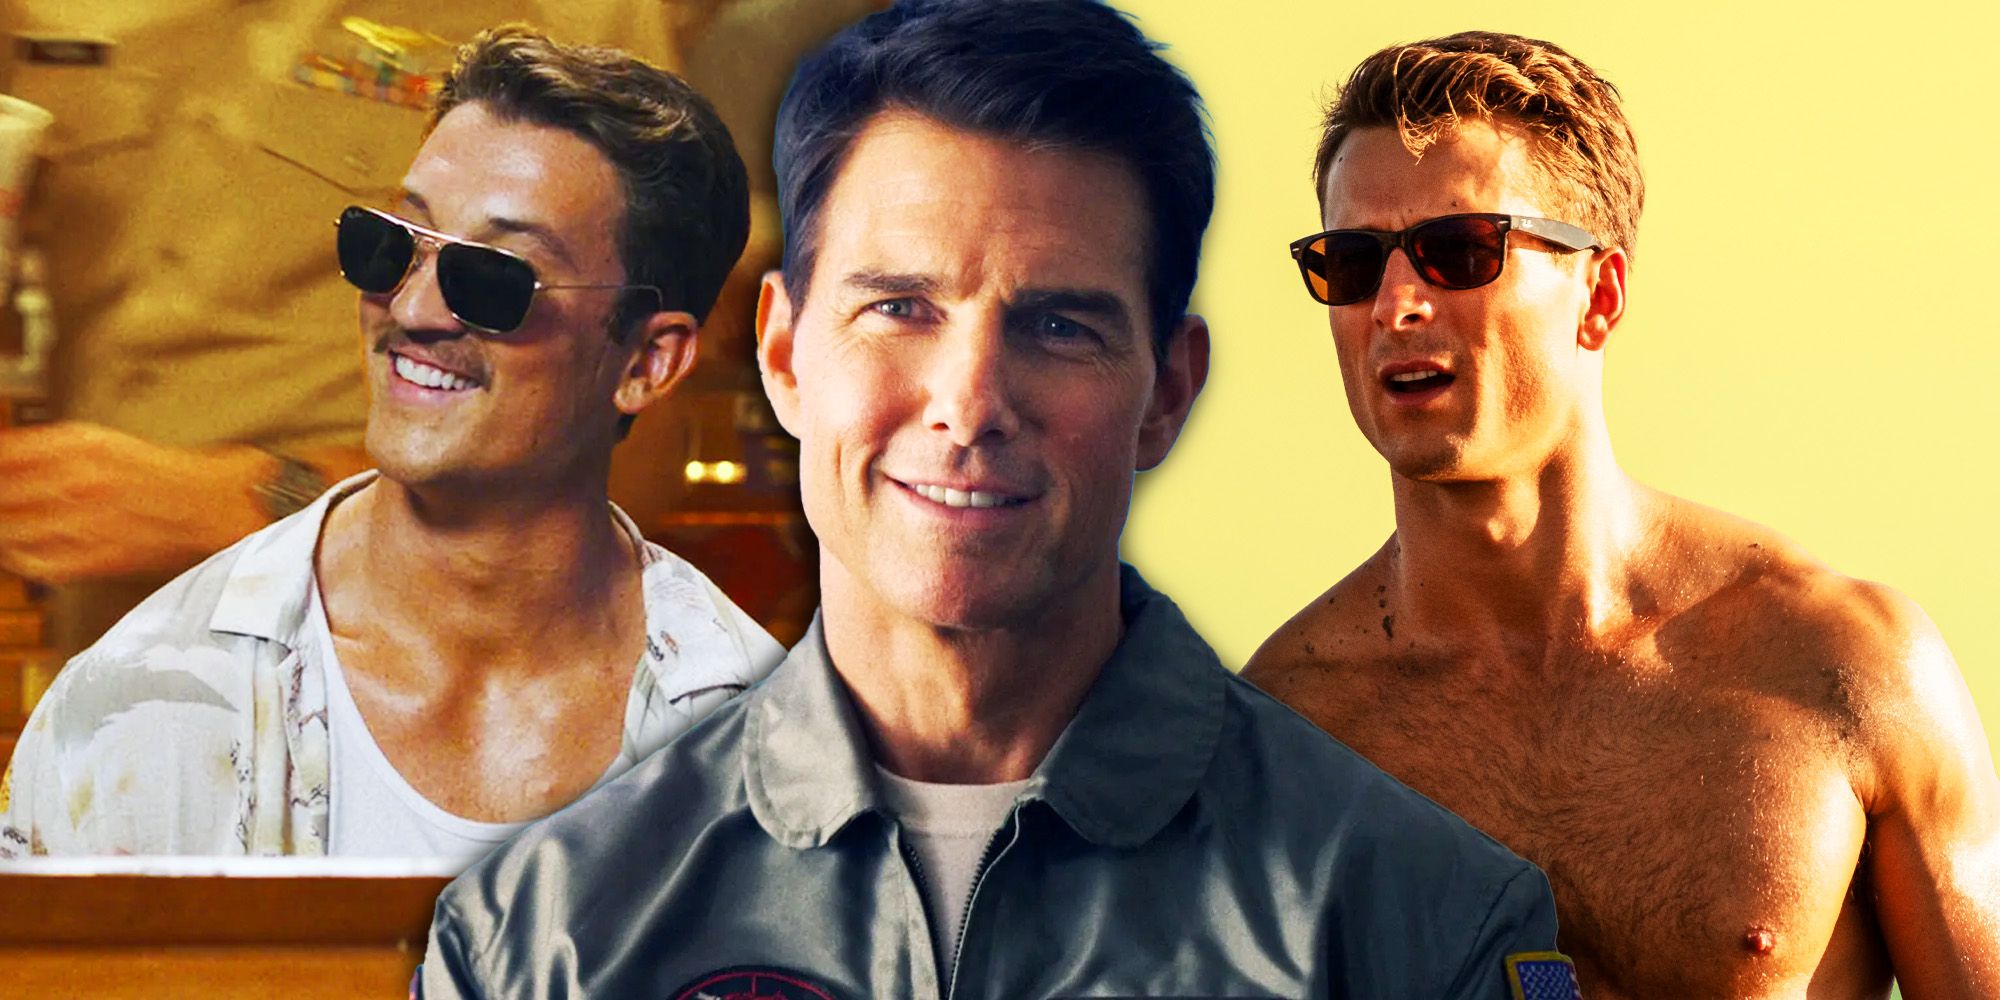 Top Gun 2 Reunion Post Has None Of Rooster & Hangman's On-Screen Rivalry